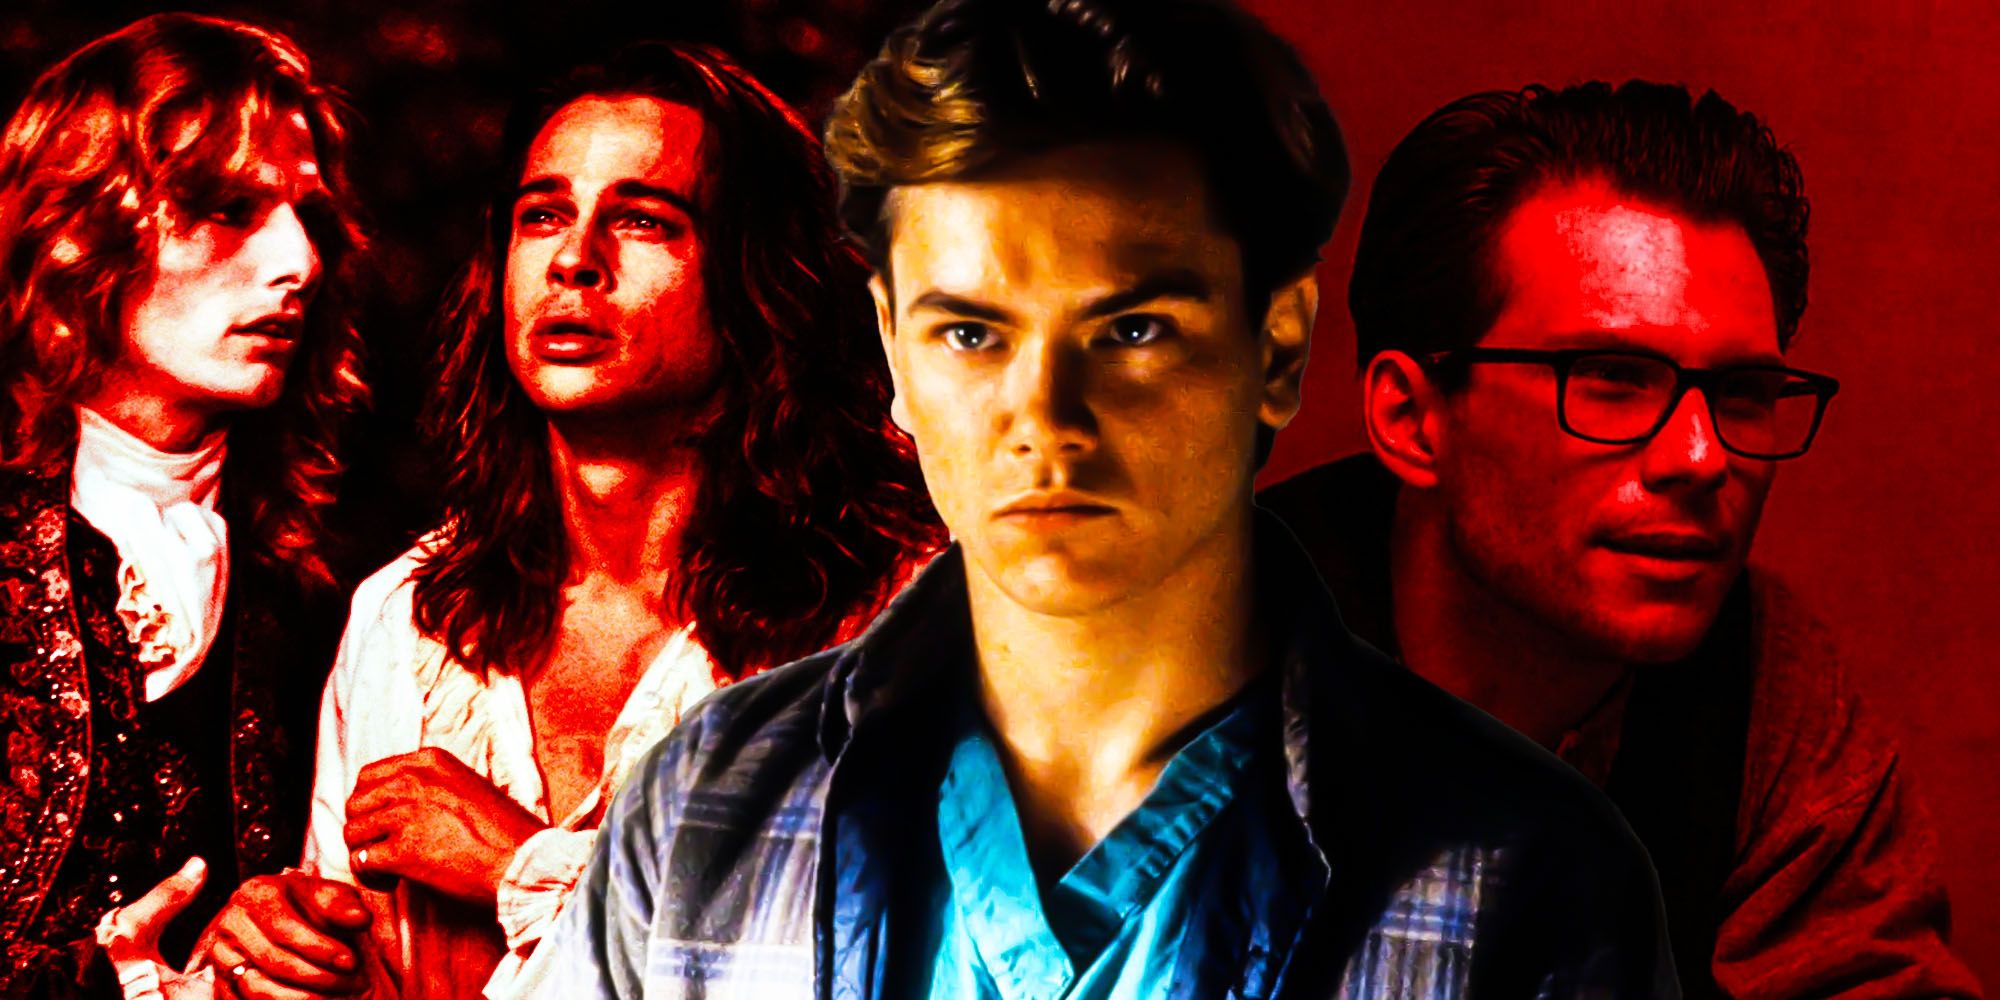 Interview with the vampire dedicated to River phoenix